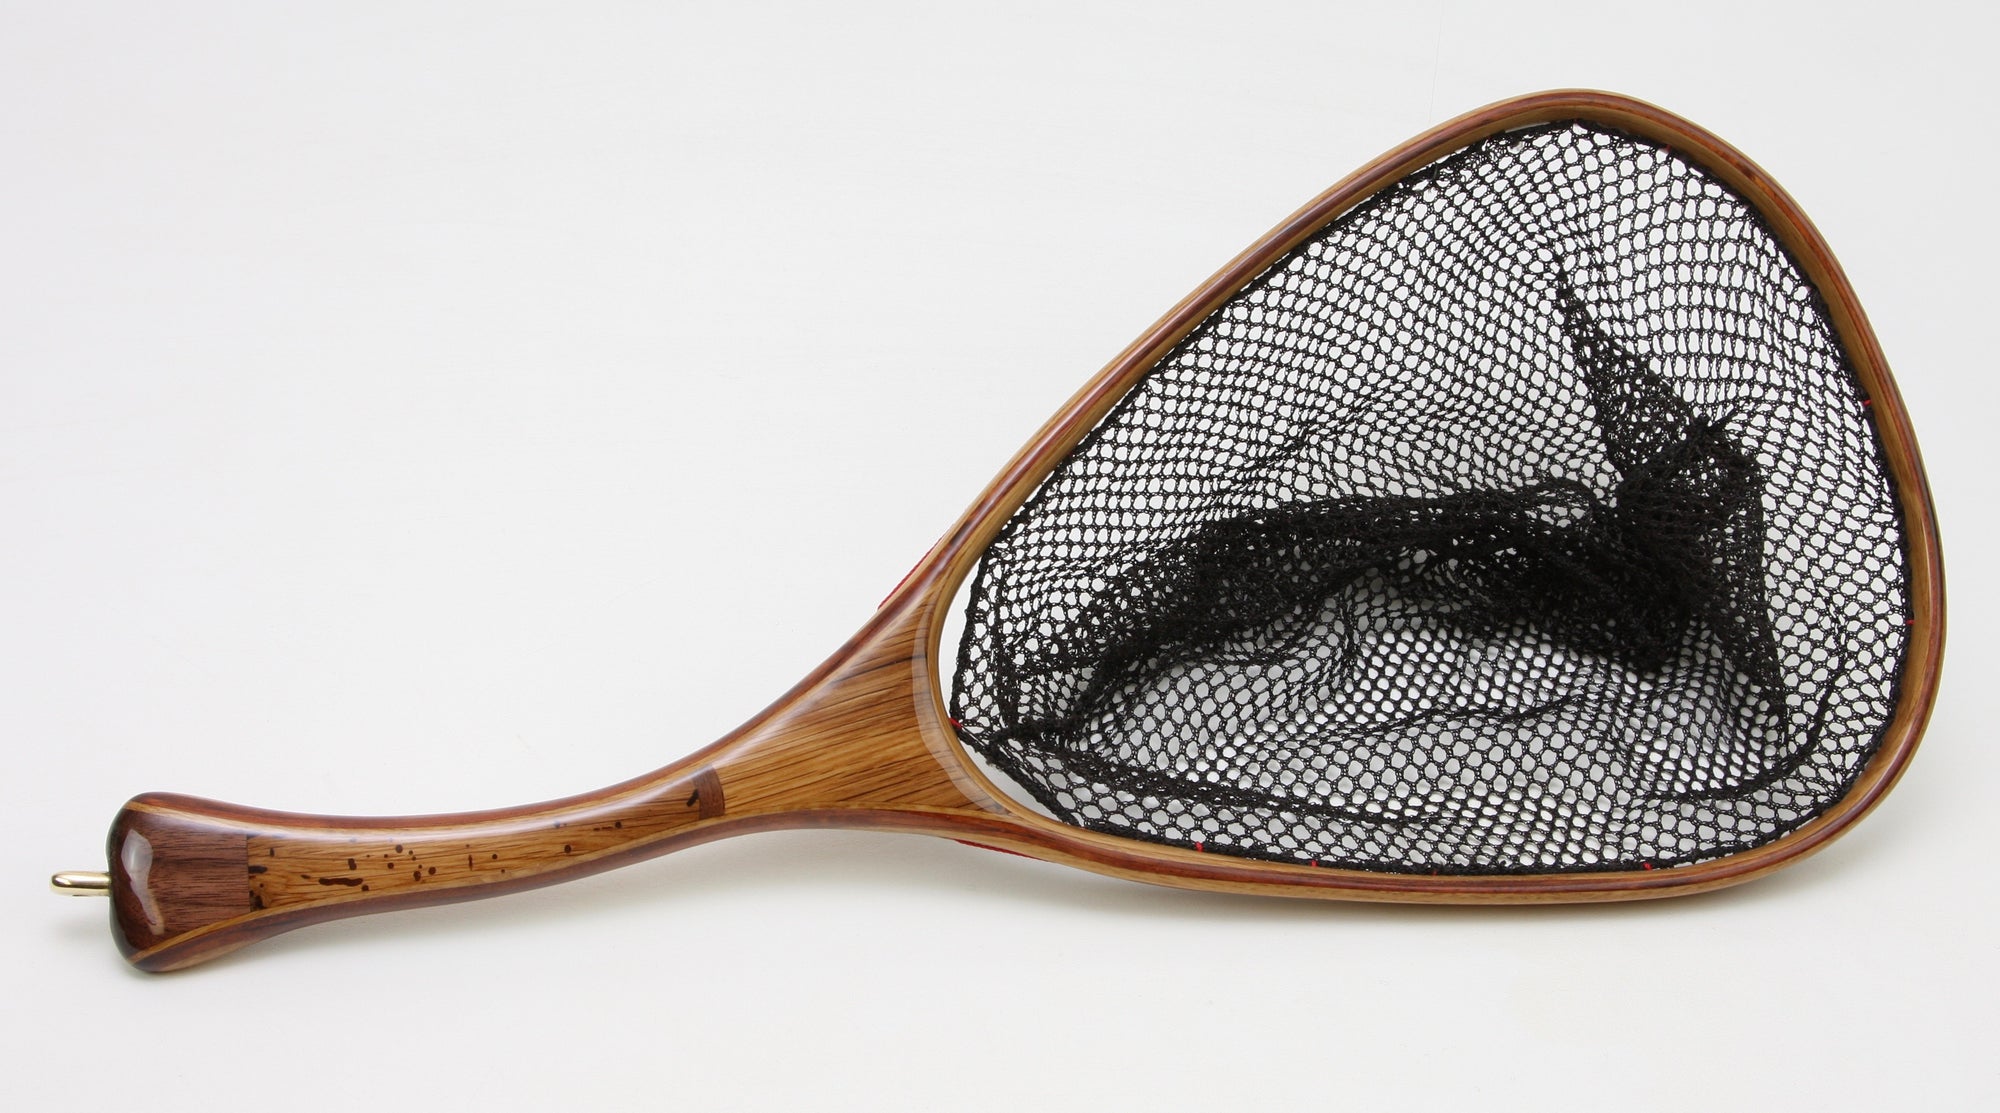 Small trout net with curved handle, brown in color.